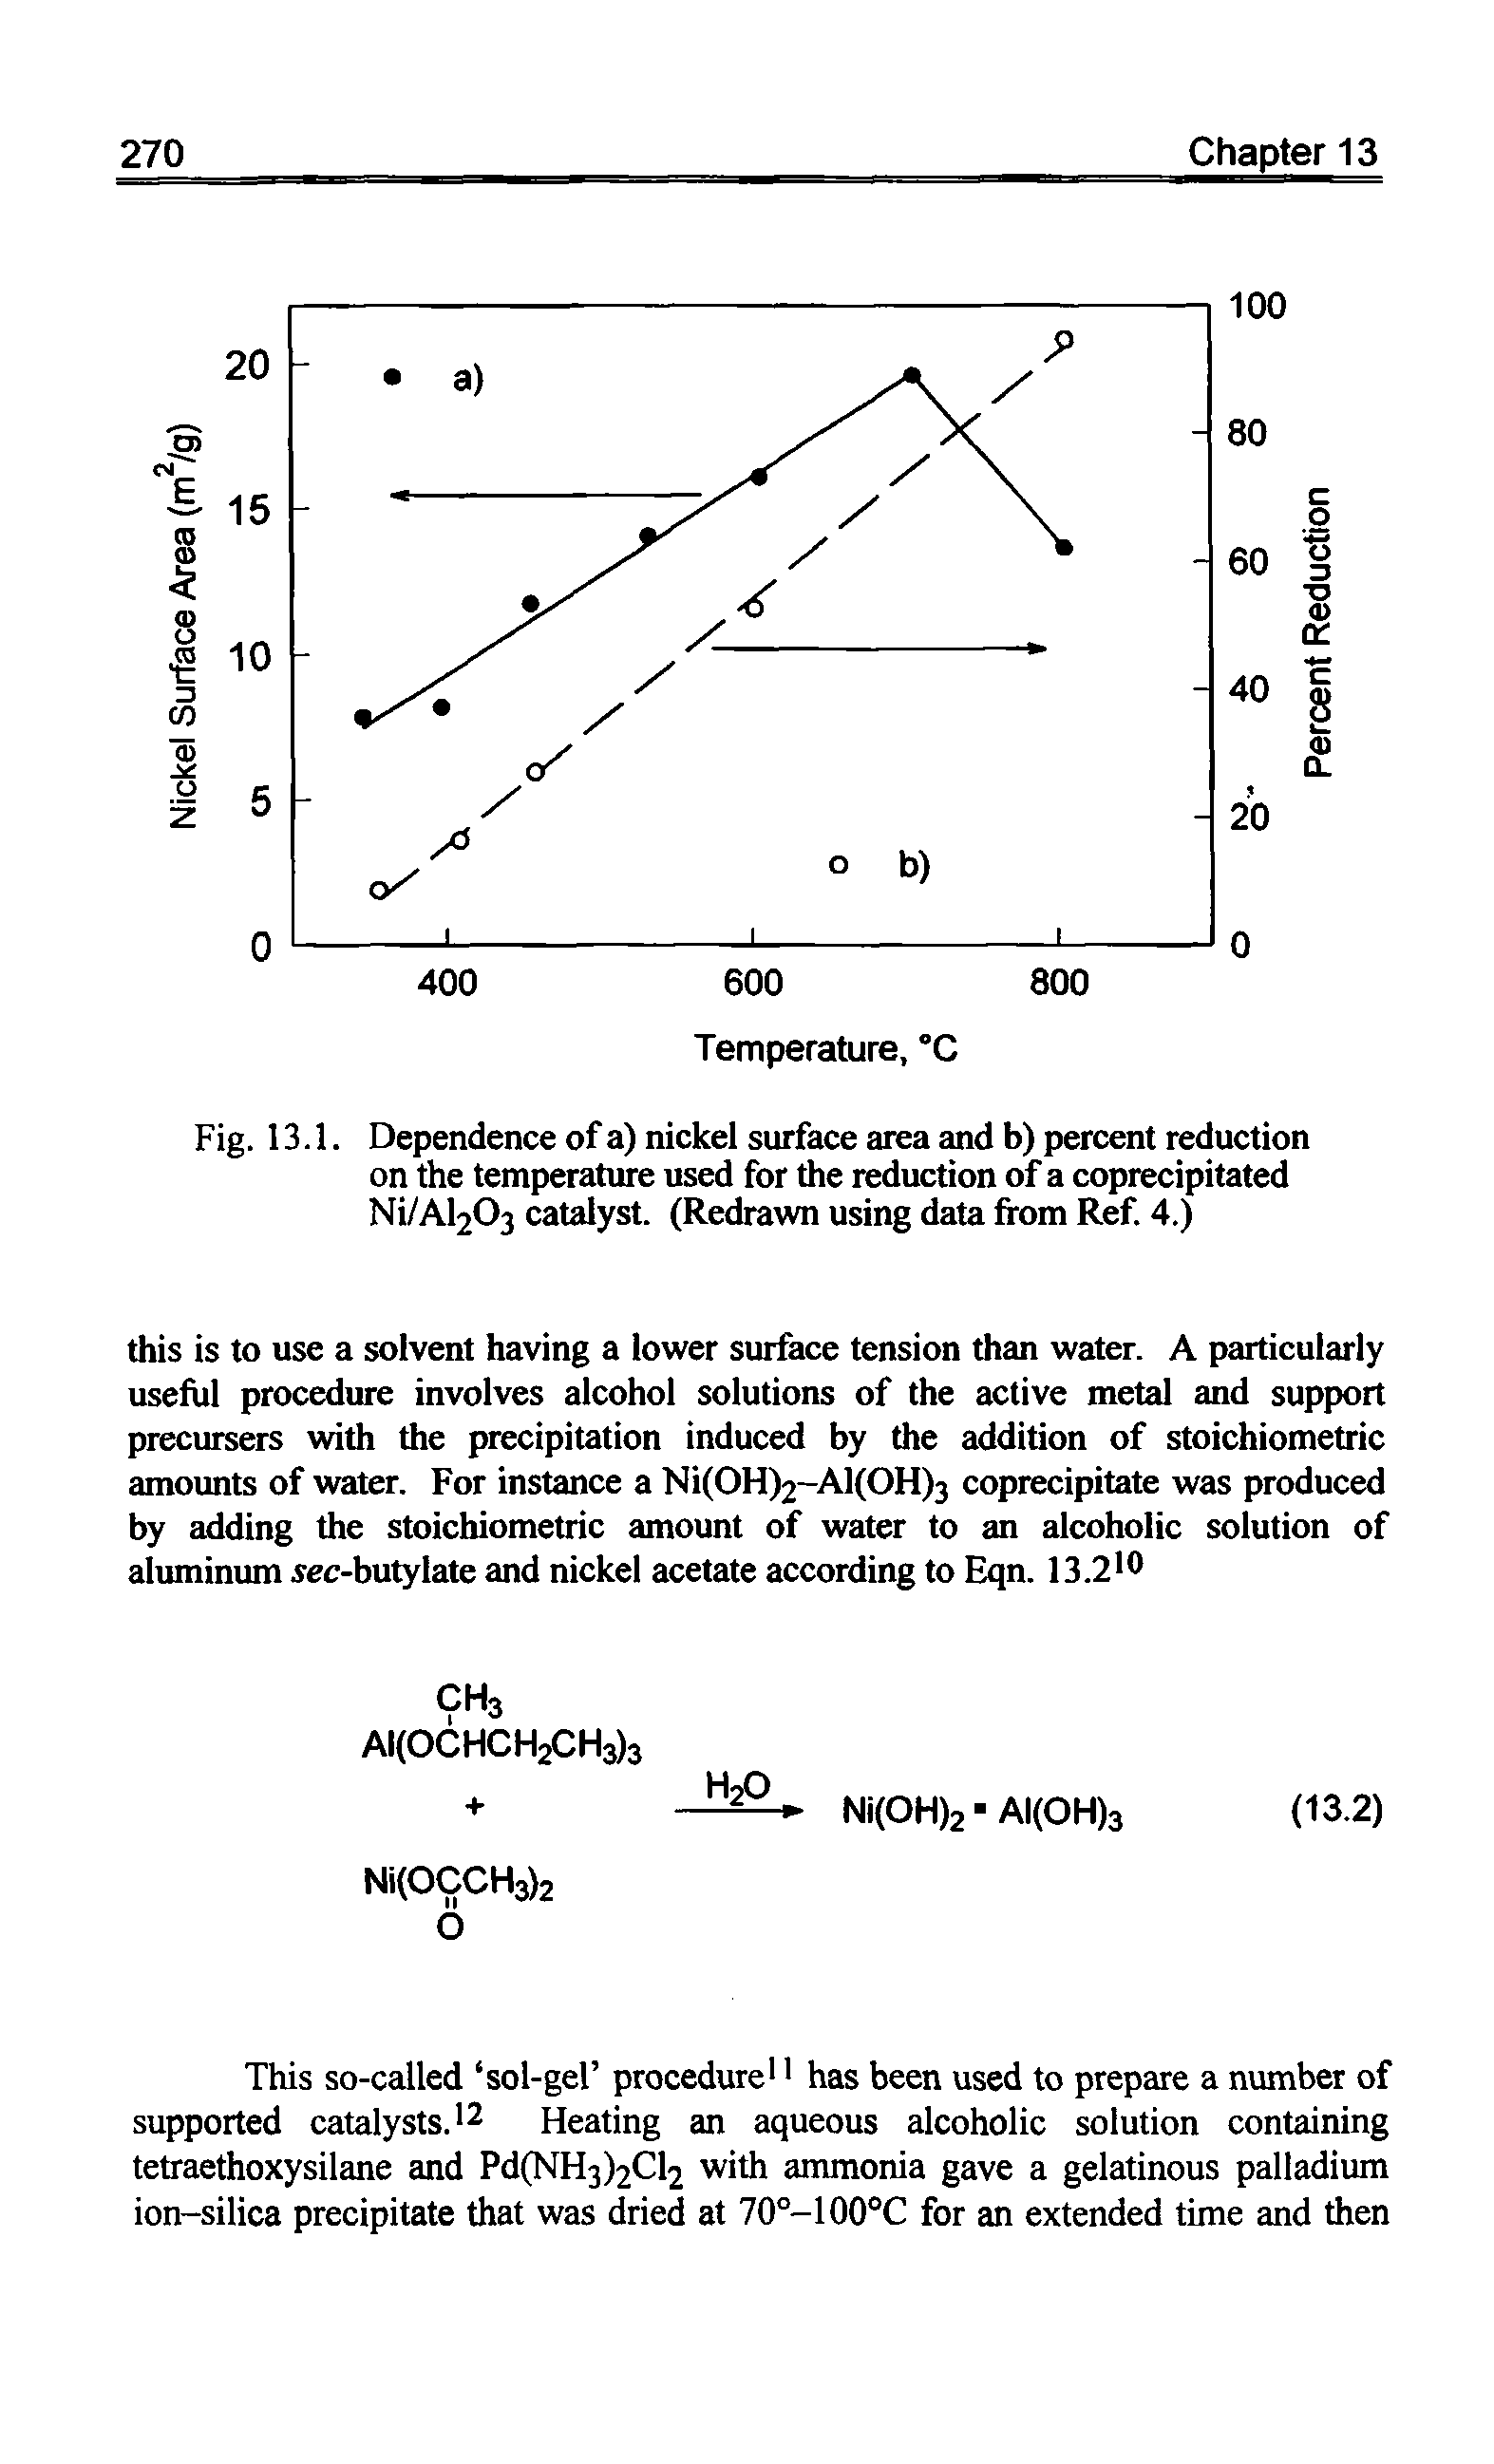 Fig. 13.1. Dependence of a) nickel surface area and b) percent reduction on the temperature used for the reduction of a coprecipitated Ni/Al203 catalyst. (Redrawn using data from Ref. 4.)...